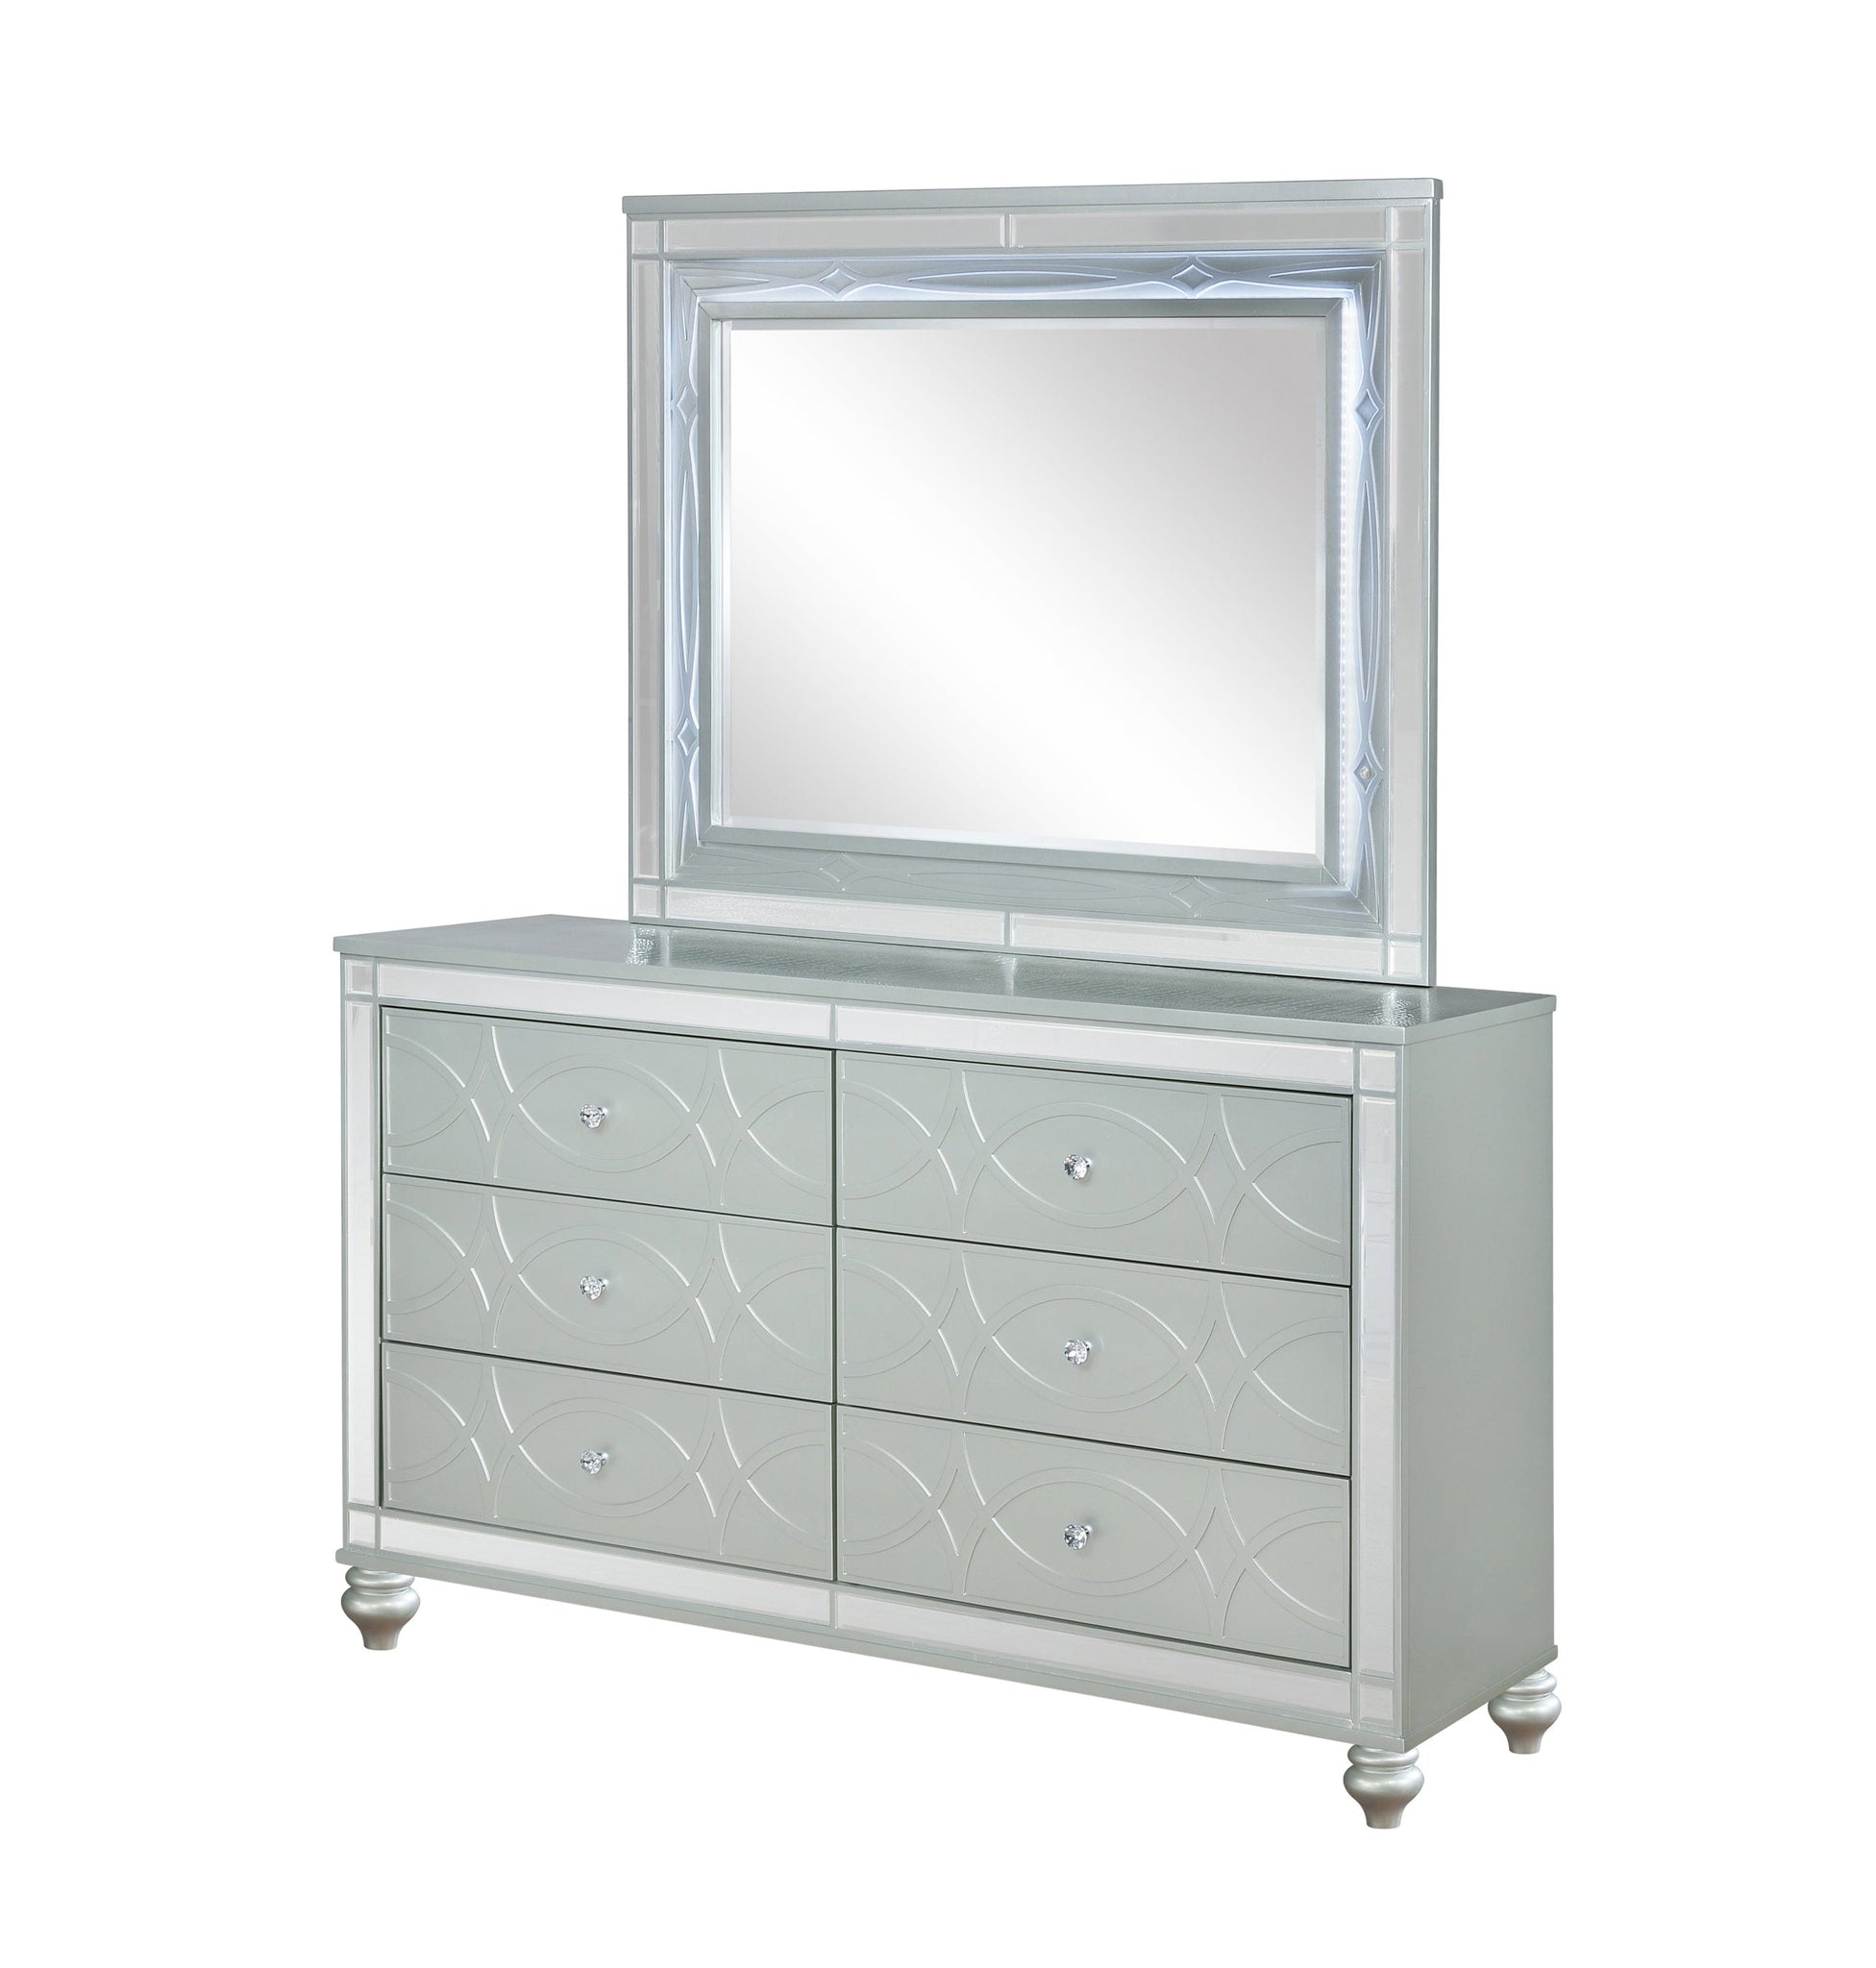 Gunnison 6-Drawer Dresser Silver Metallic, Give Your Home A Modern Glam Update To Classic Design With This Transitional Six-Drawer Dresser. It Features A Giltzy Design That Takes Center Stage In Any Modern Bedroom.  SKU: 223213